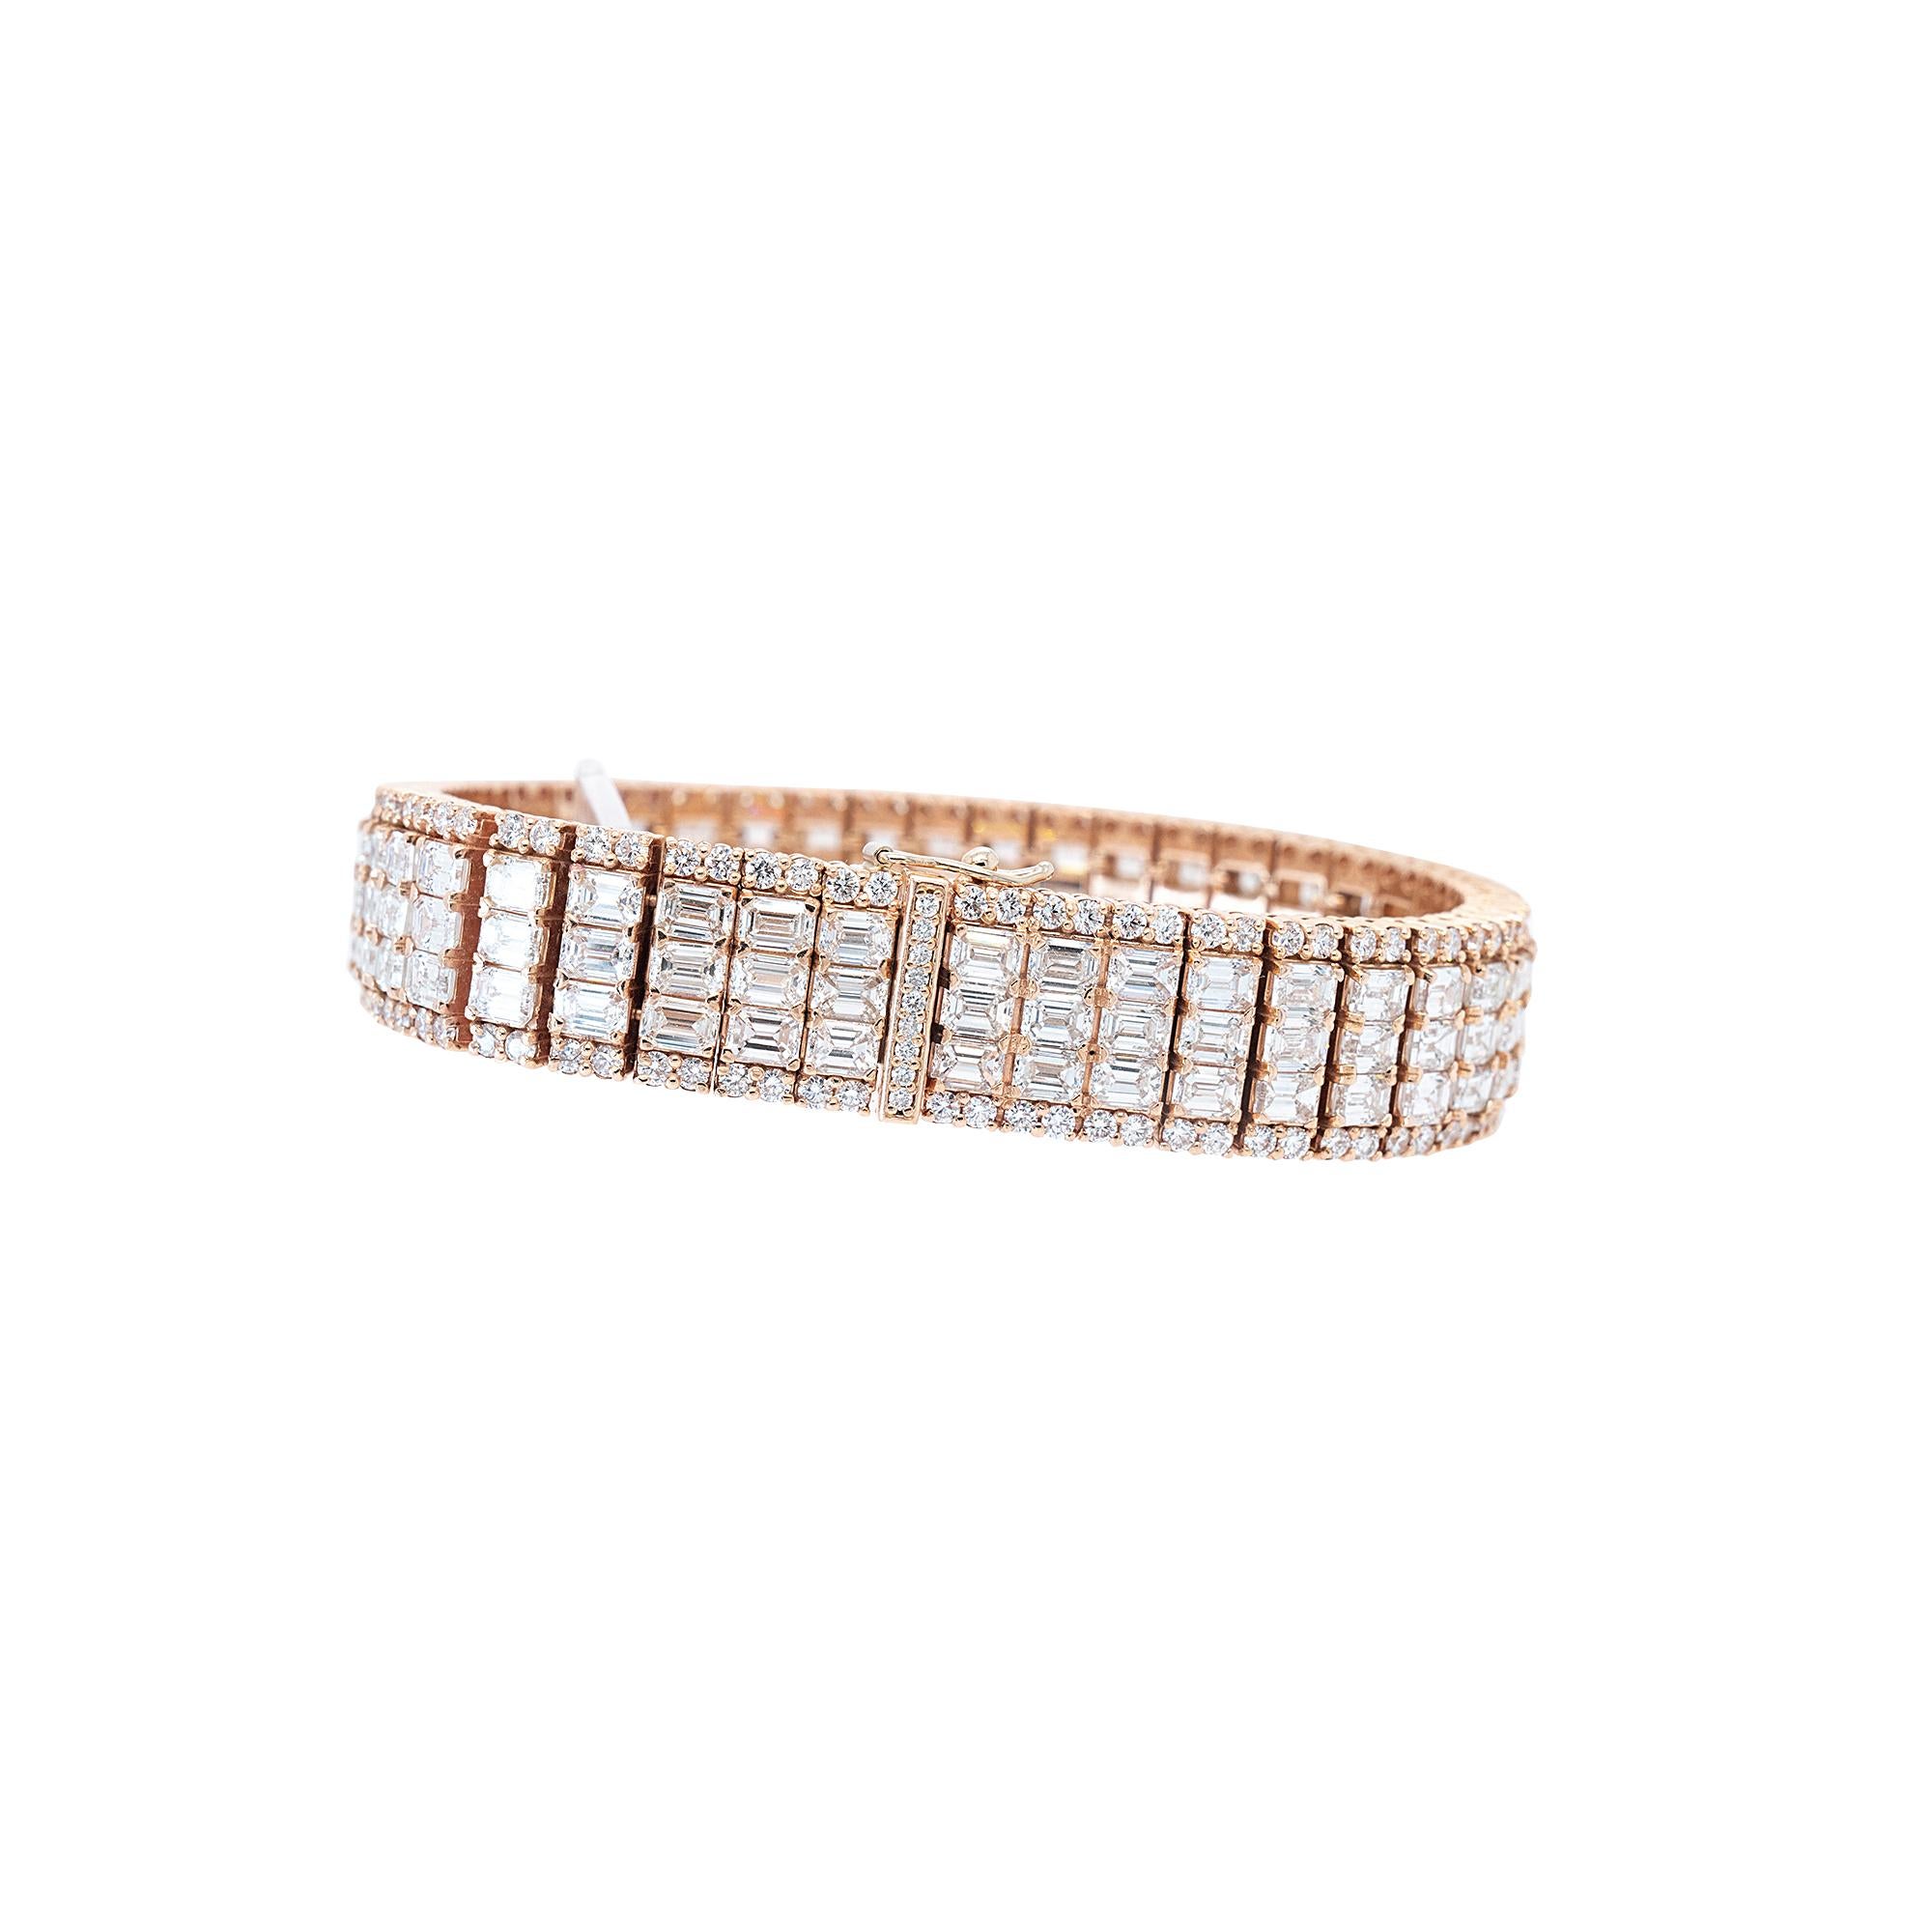 Material: 14k Rose Gold
Diamond Details: Approximately 35.0ctw of Natural Emerald Cut and Round Brilliant Natural Diamonds
Measurements: 7.5